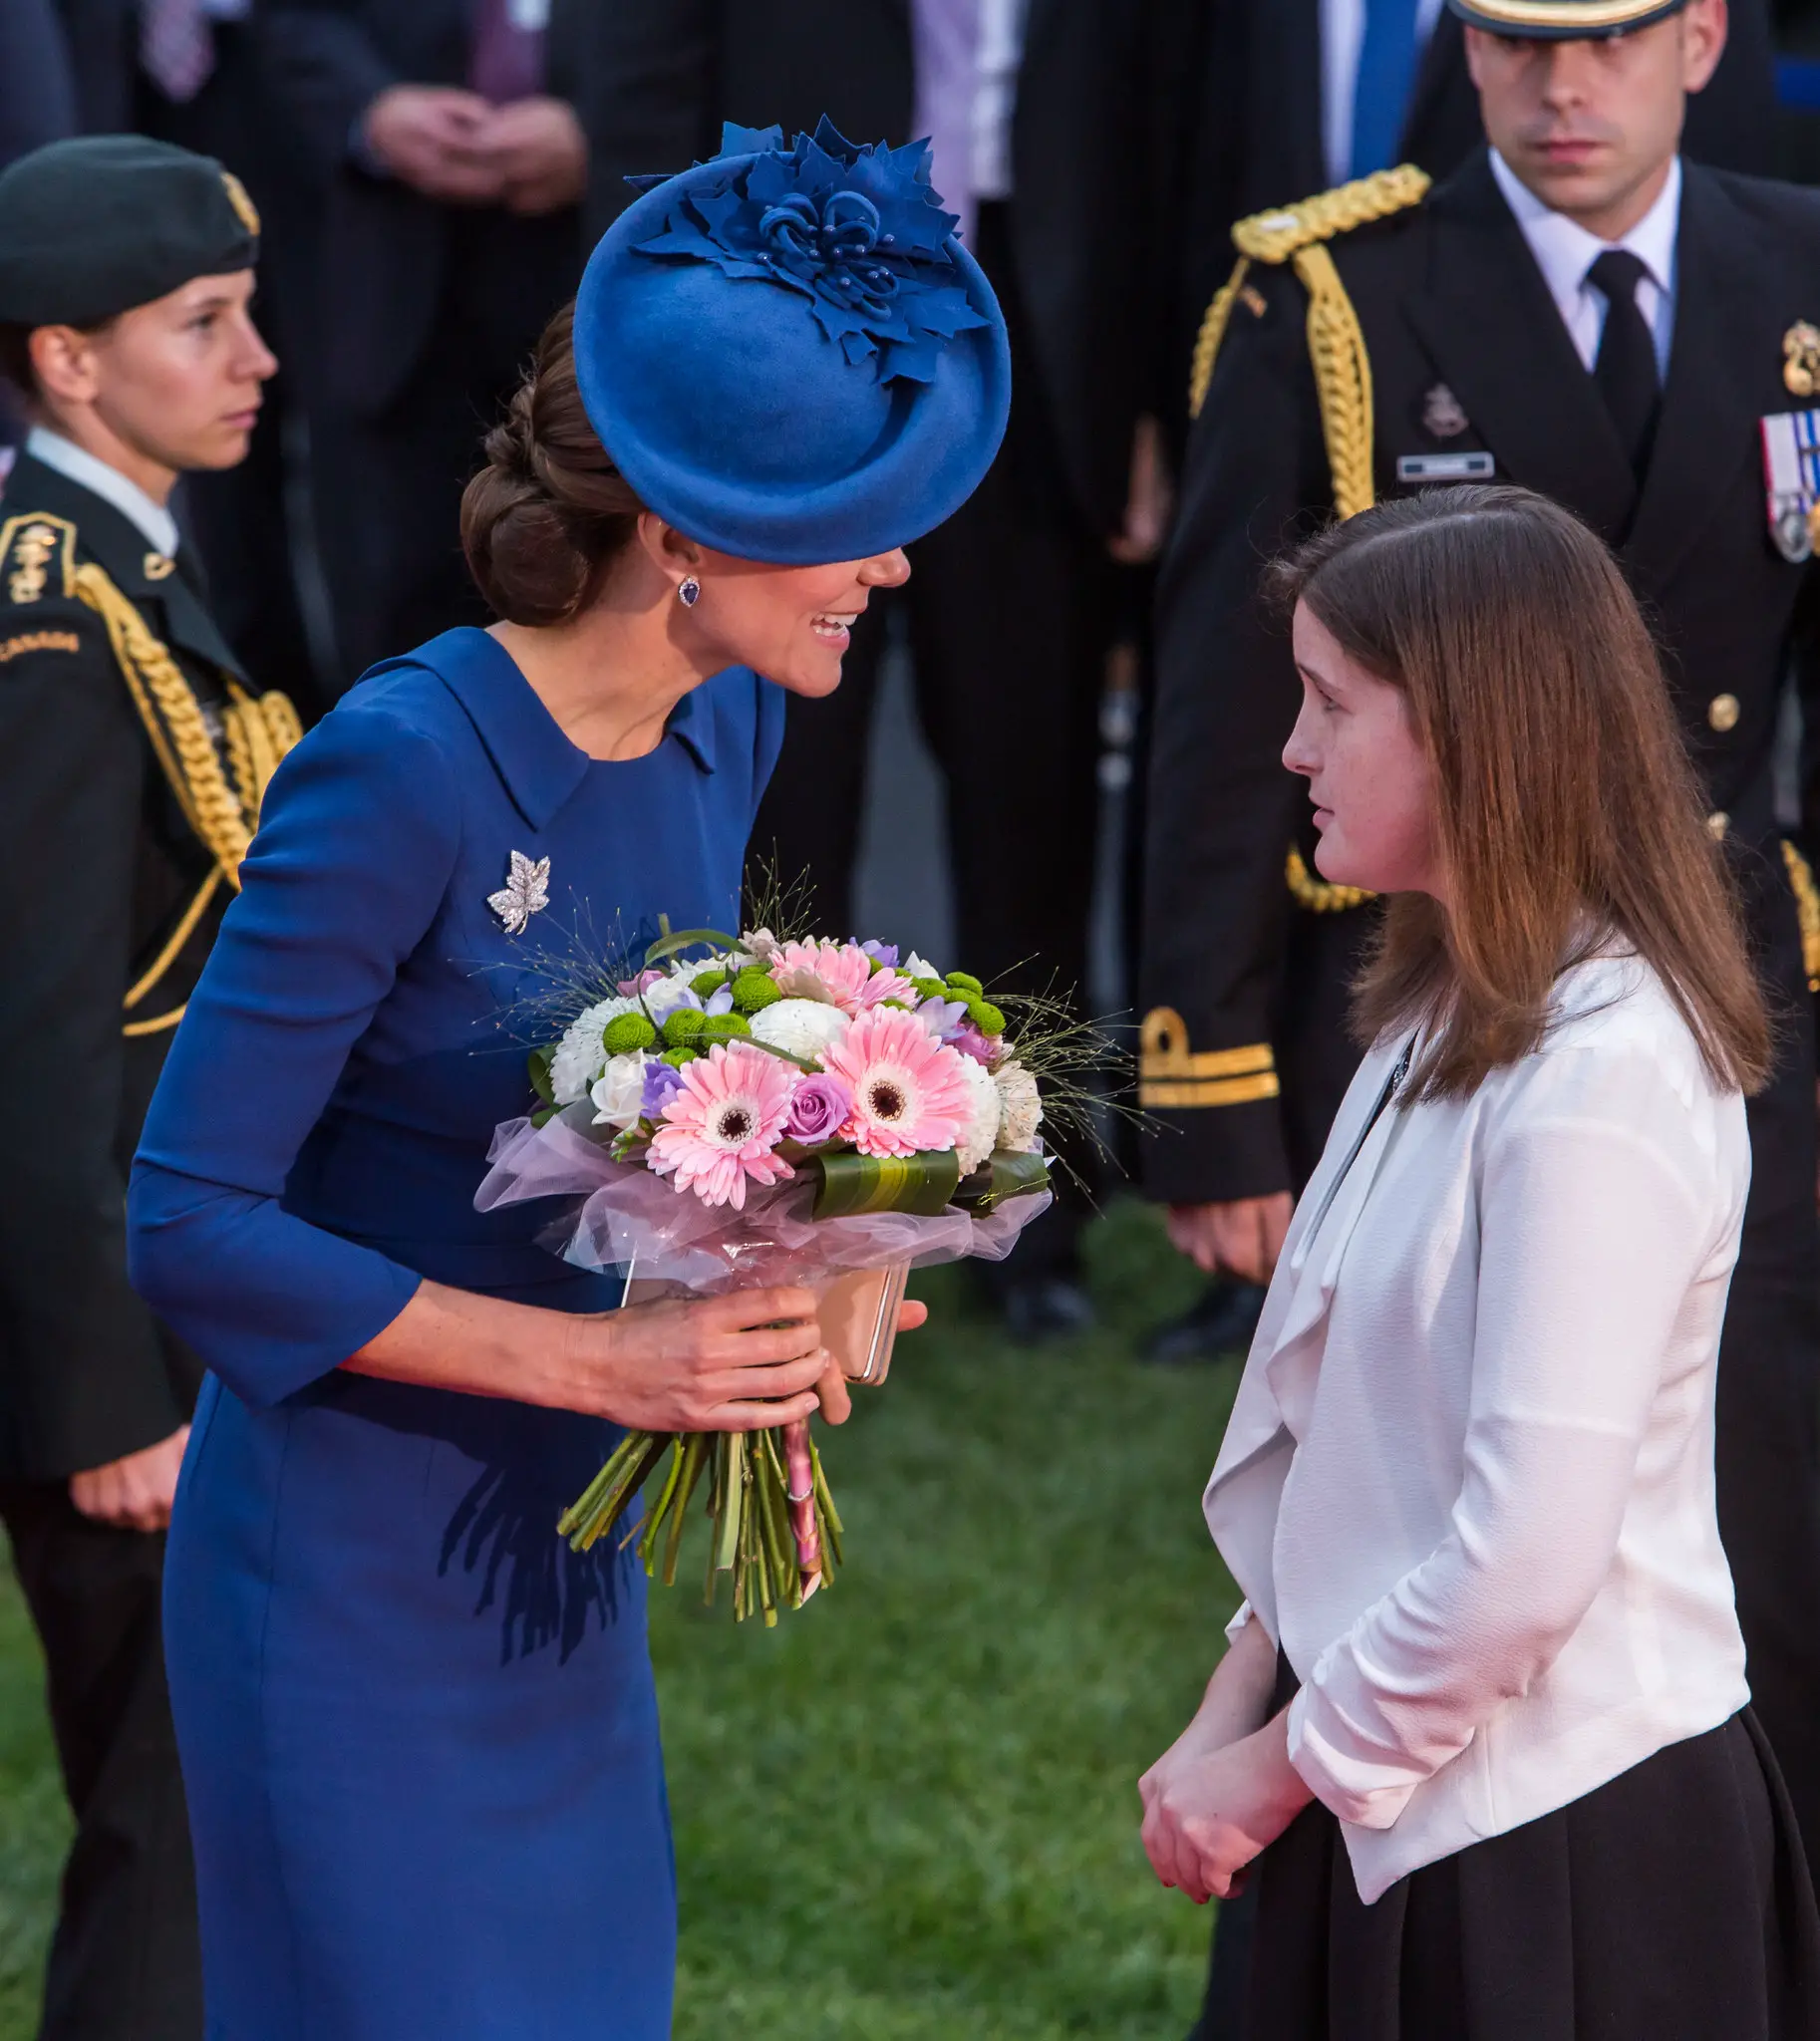 The Duchess of Cambridge received floral welcome in Canada in September 2016